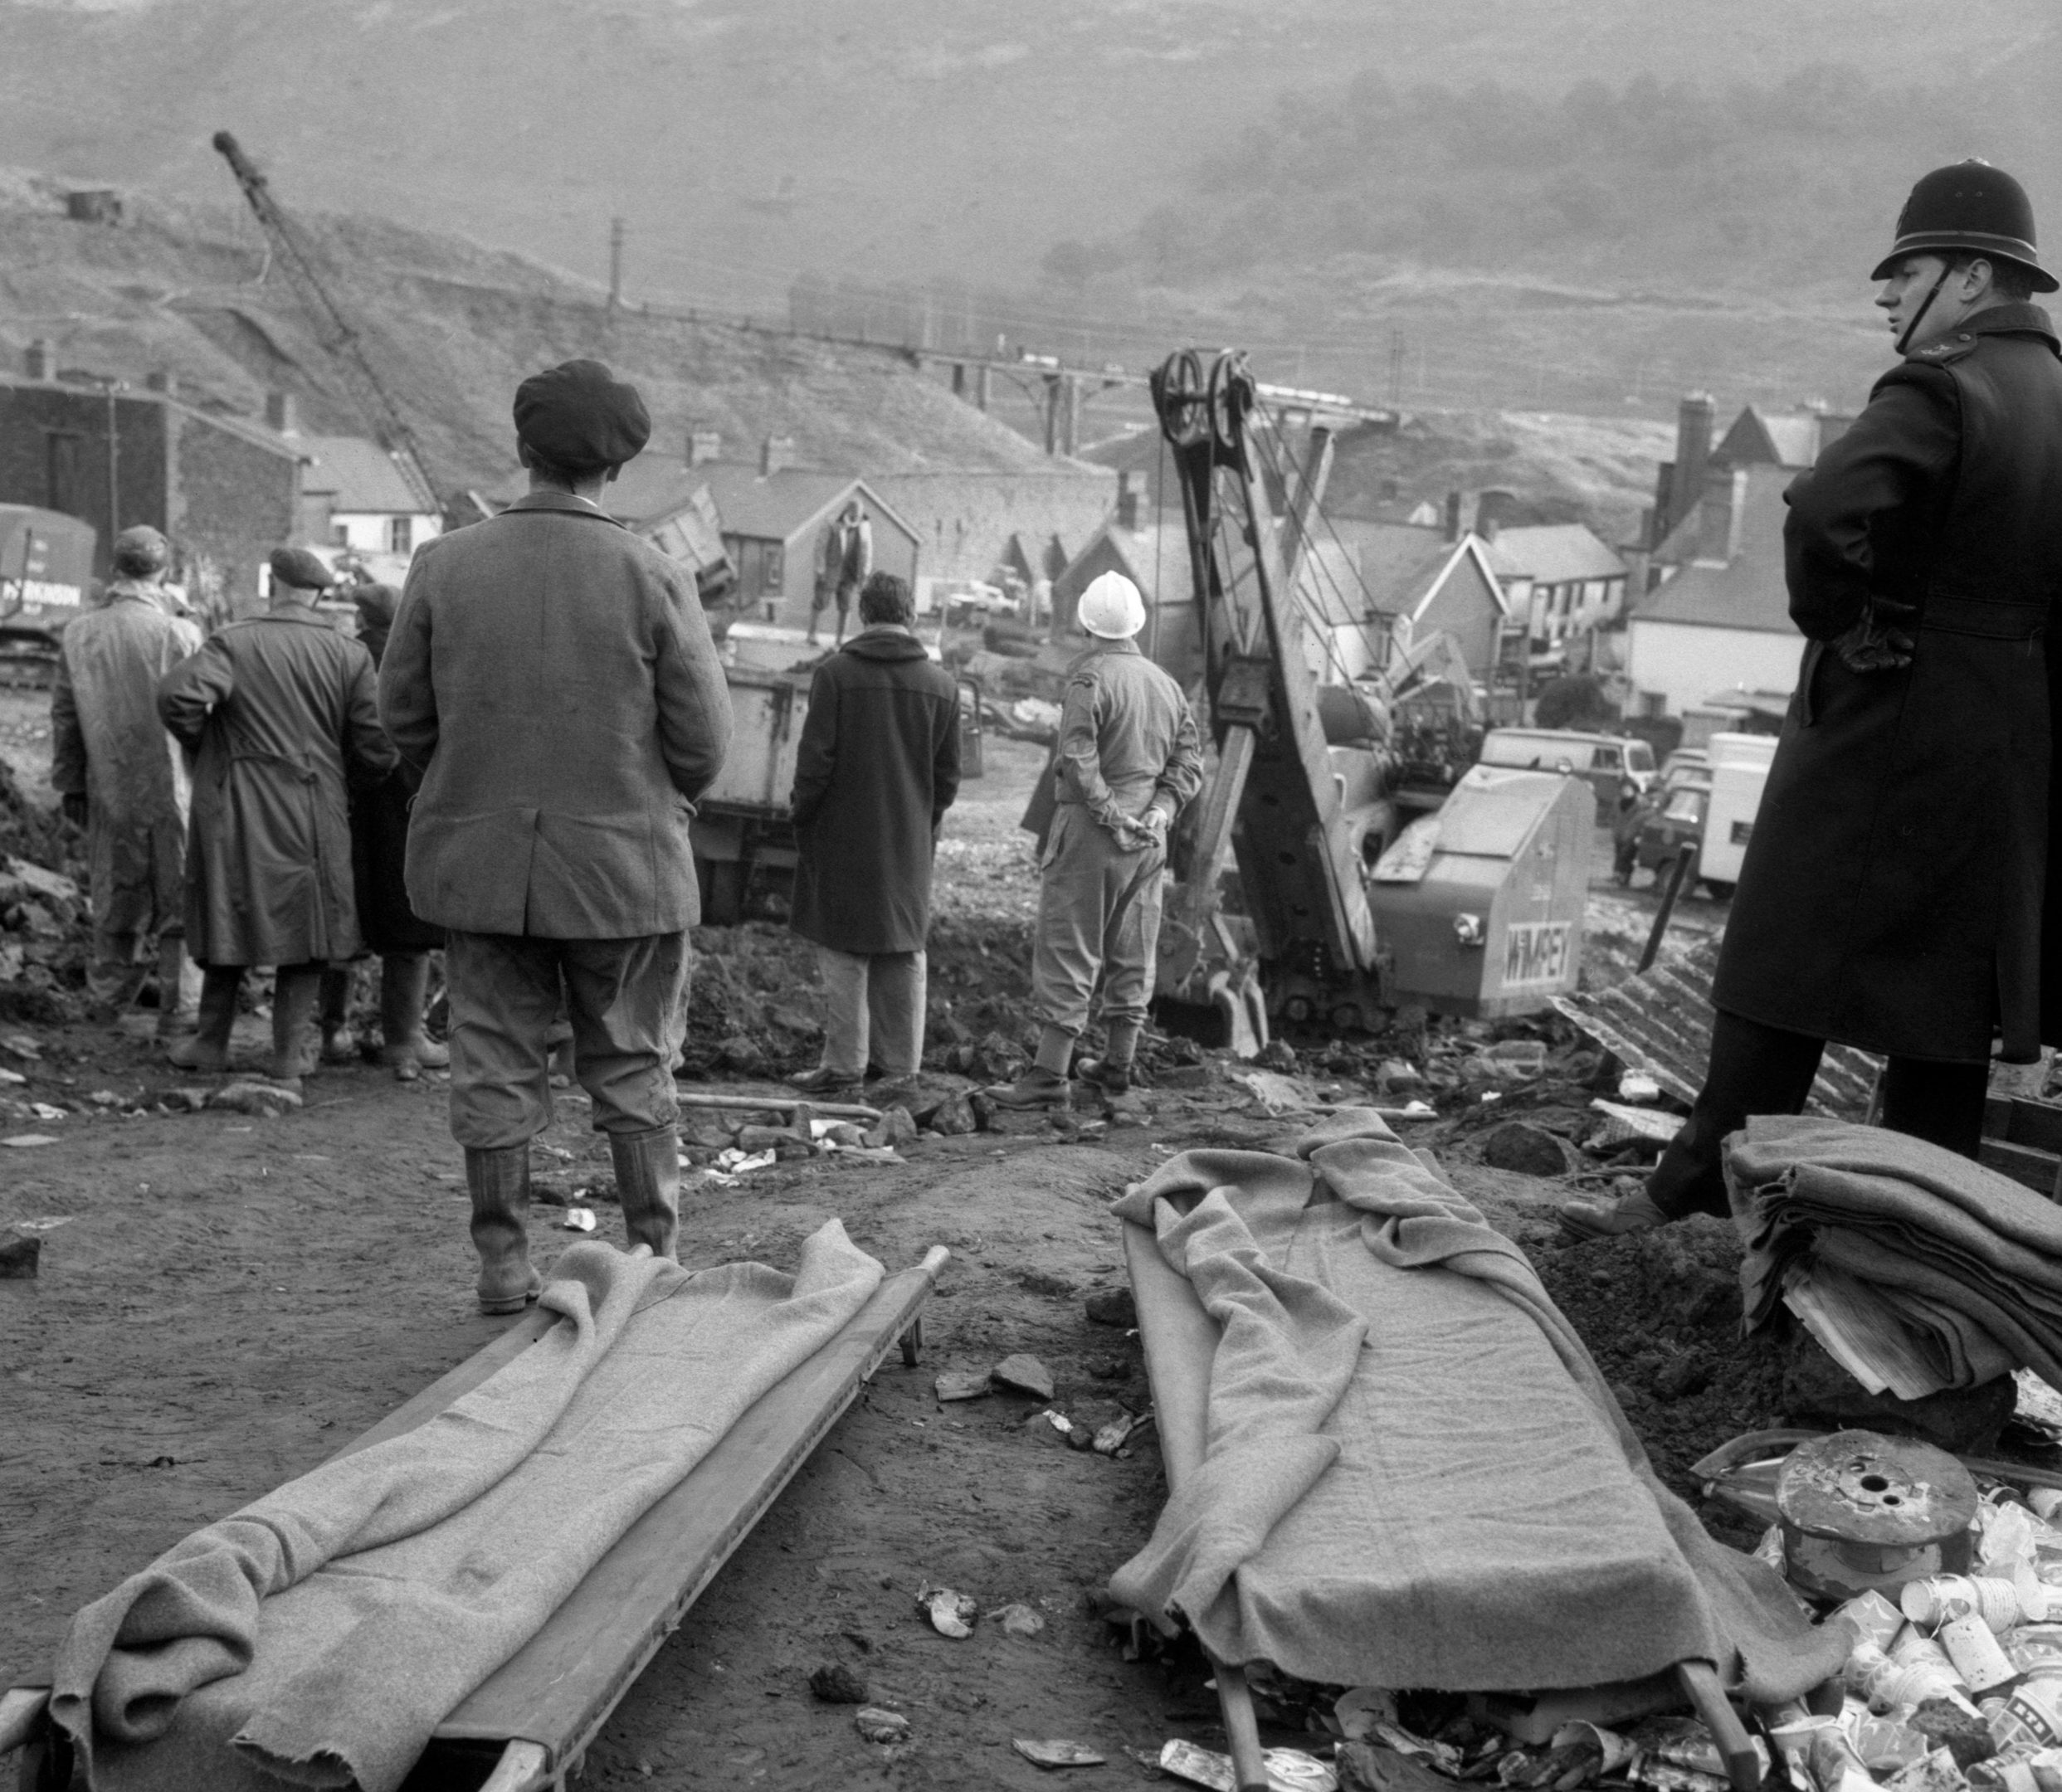 The wake of the disaster in 1966.